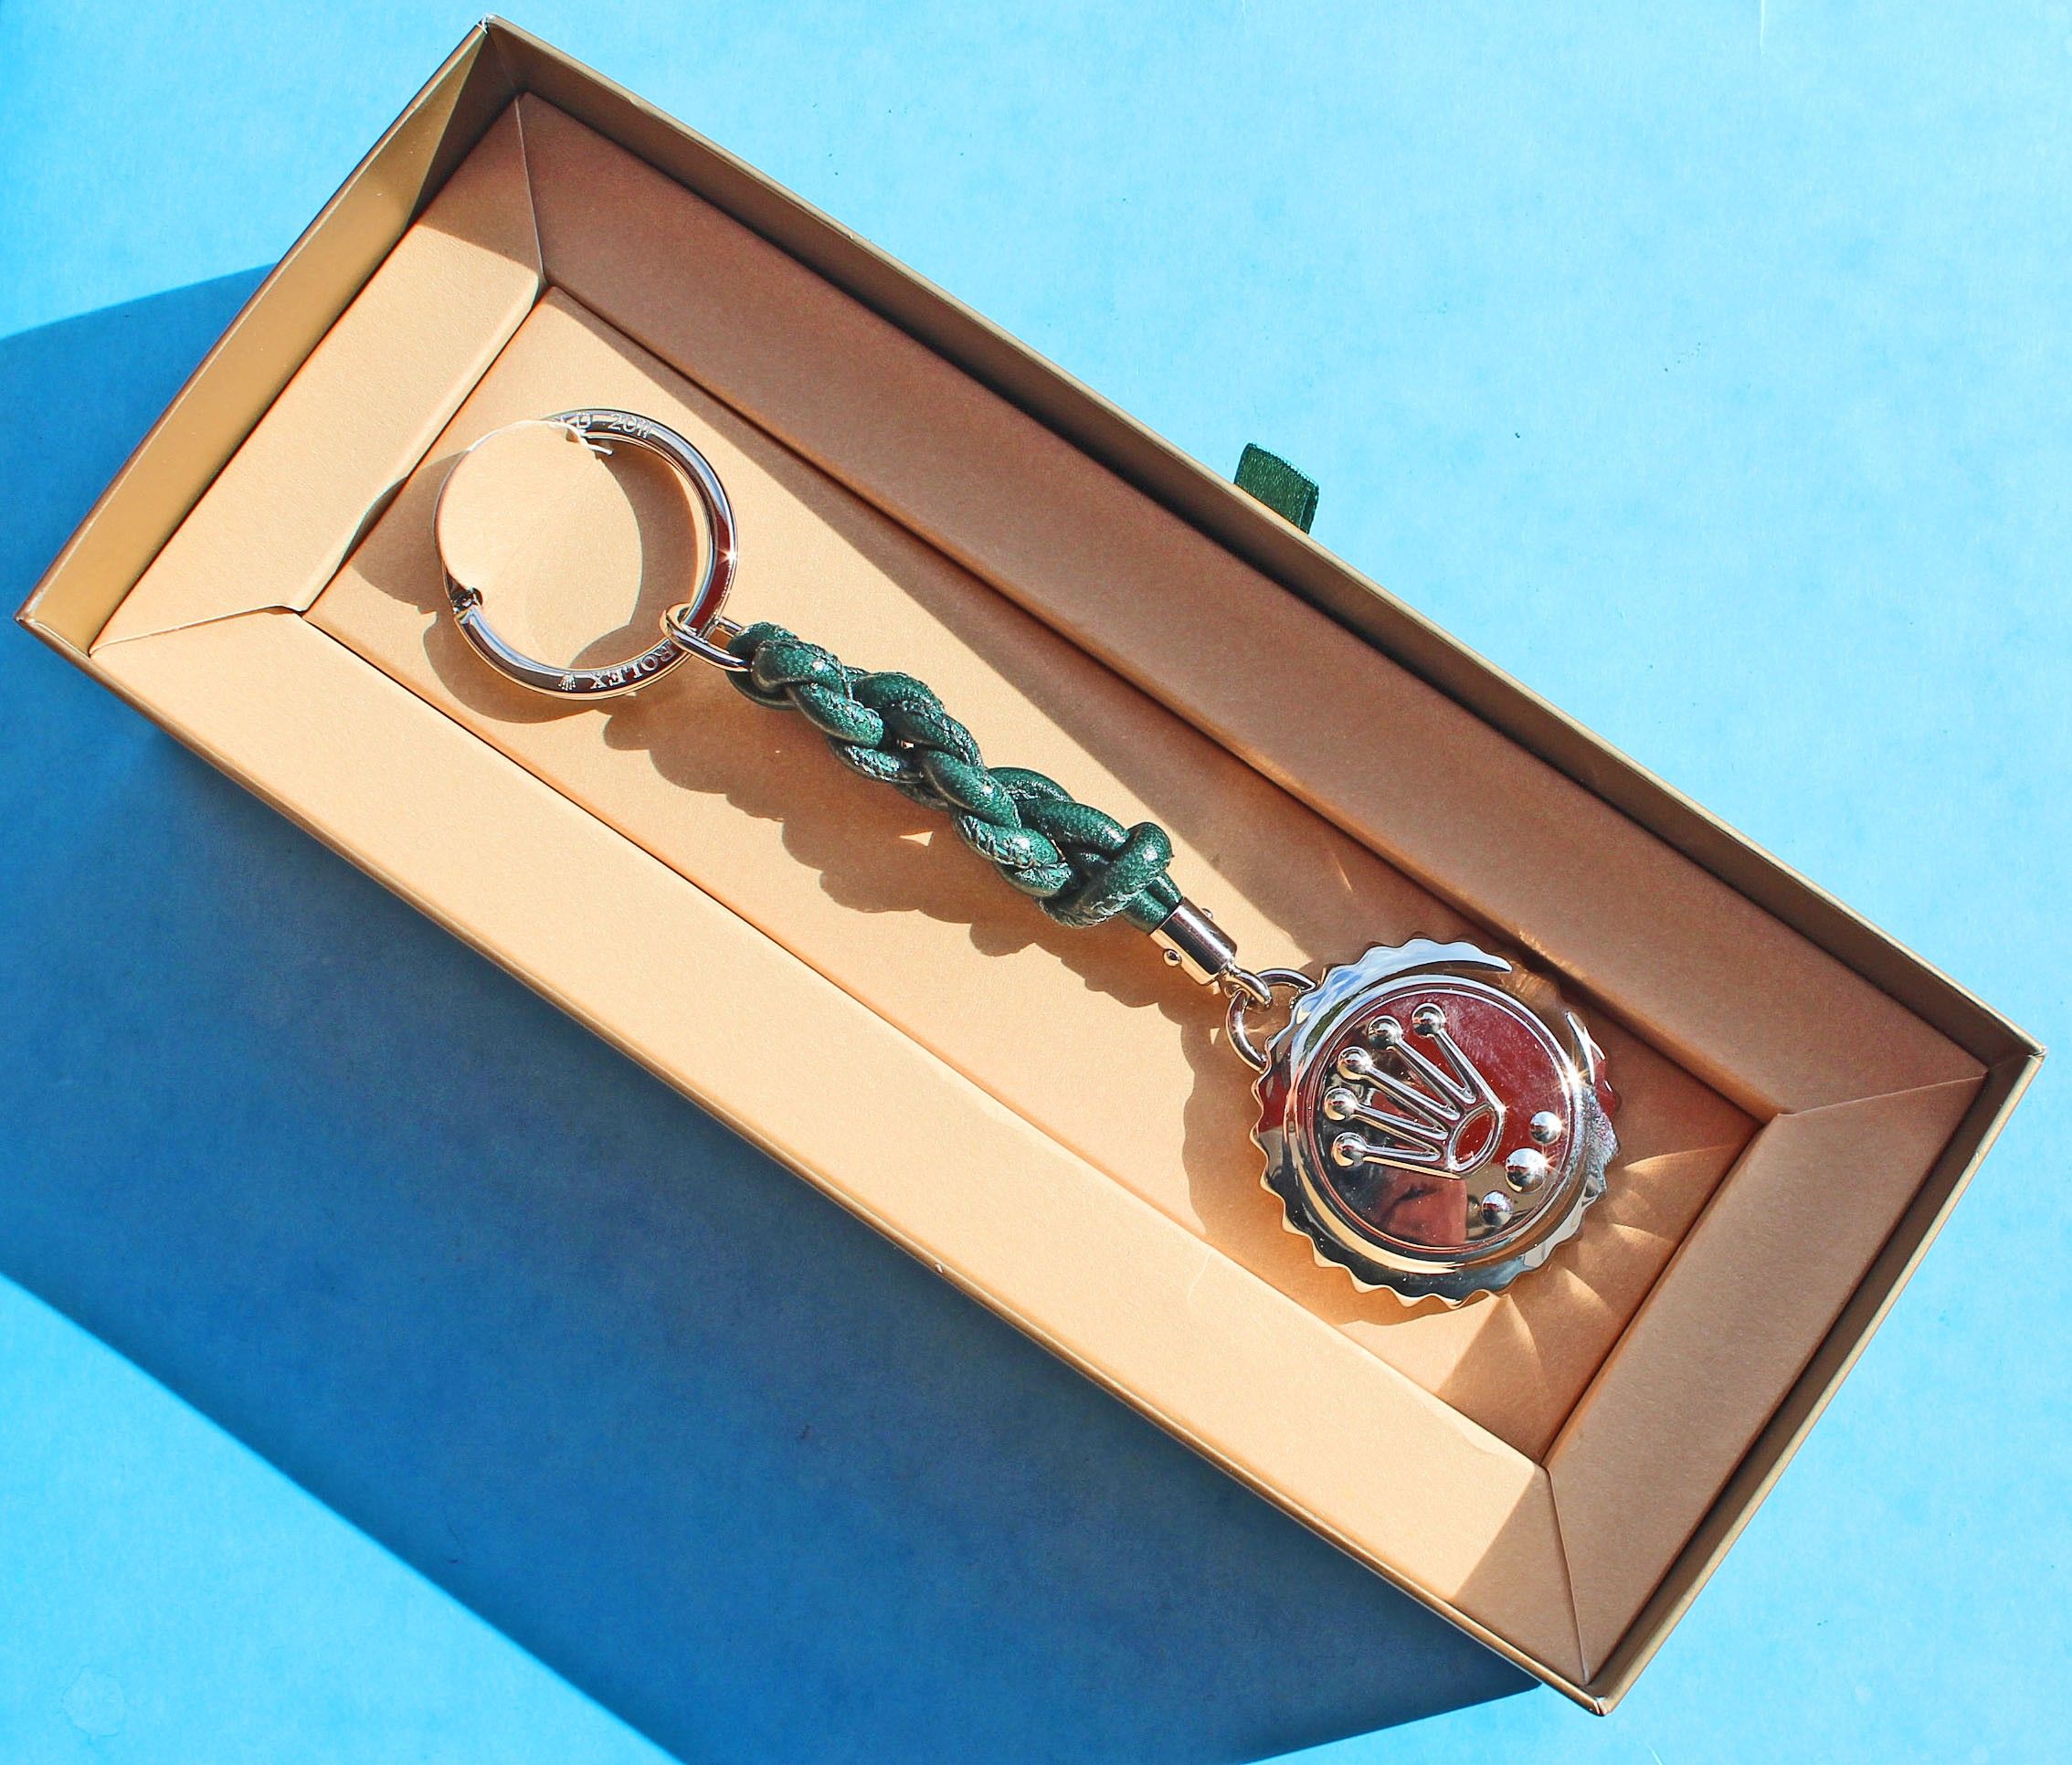 Rolex Collectible Triplock Coronet Submariner crown stainless steel key  ring, keychain, holder baselworld watch goodies